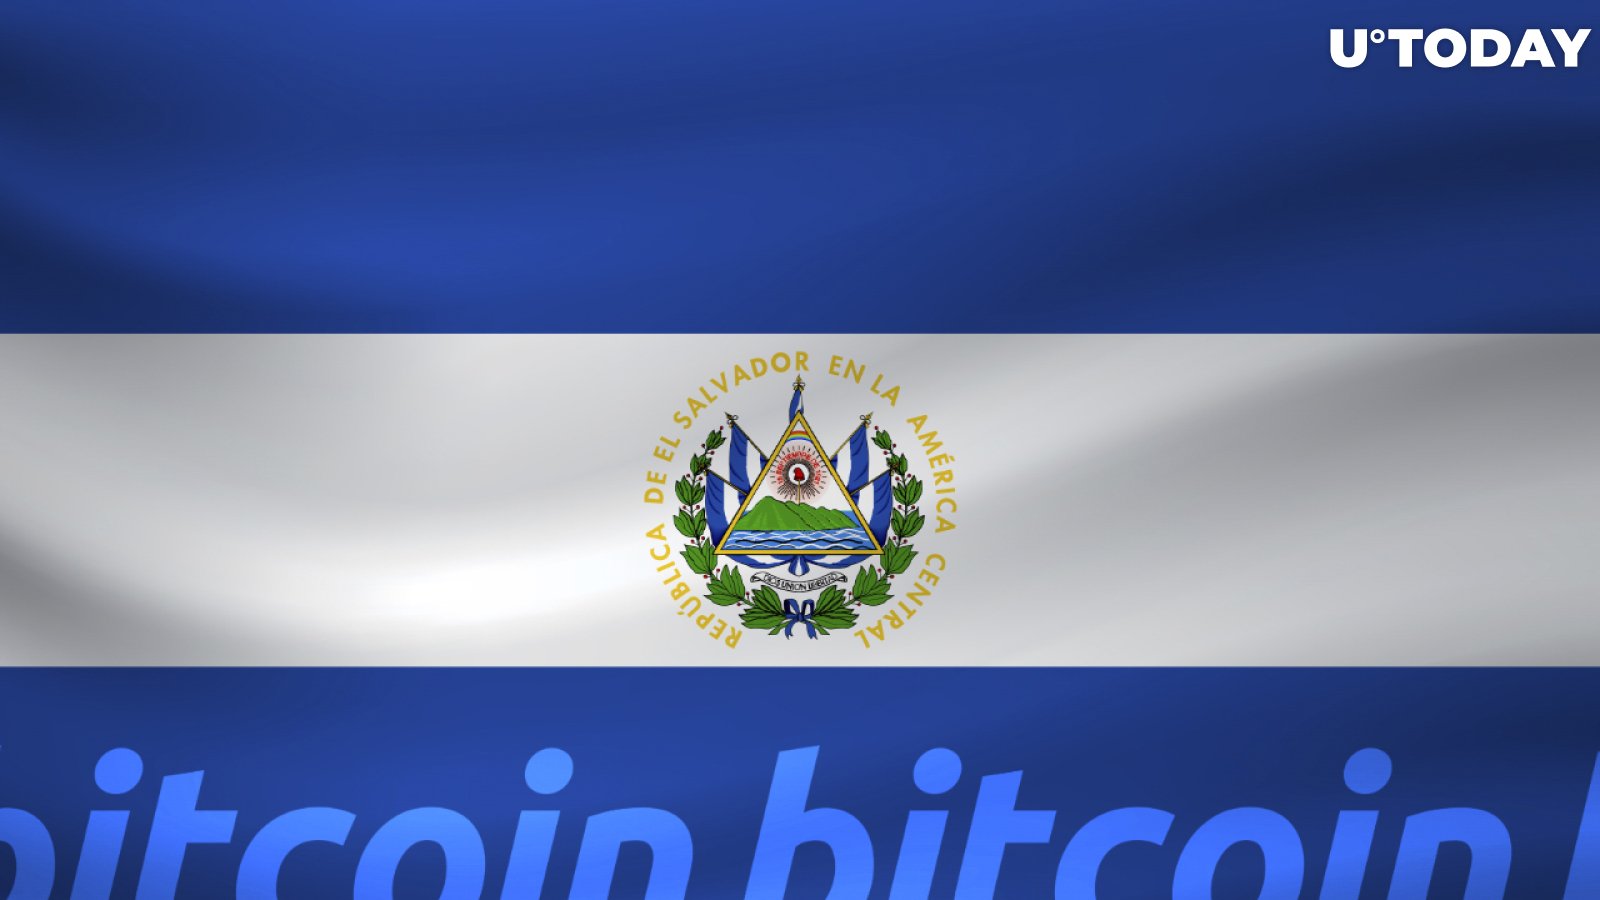 El Salvador Plans to Release Bitcoin Bonds, Drops Dollar-Denominated Bonds to All-Time Low